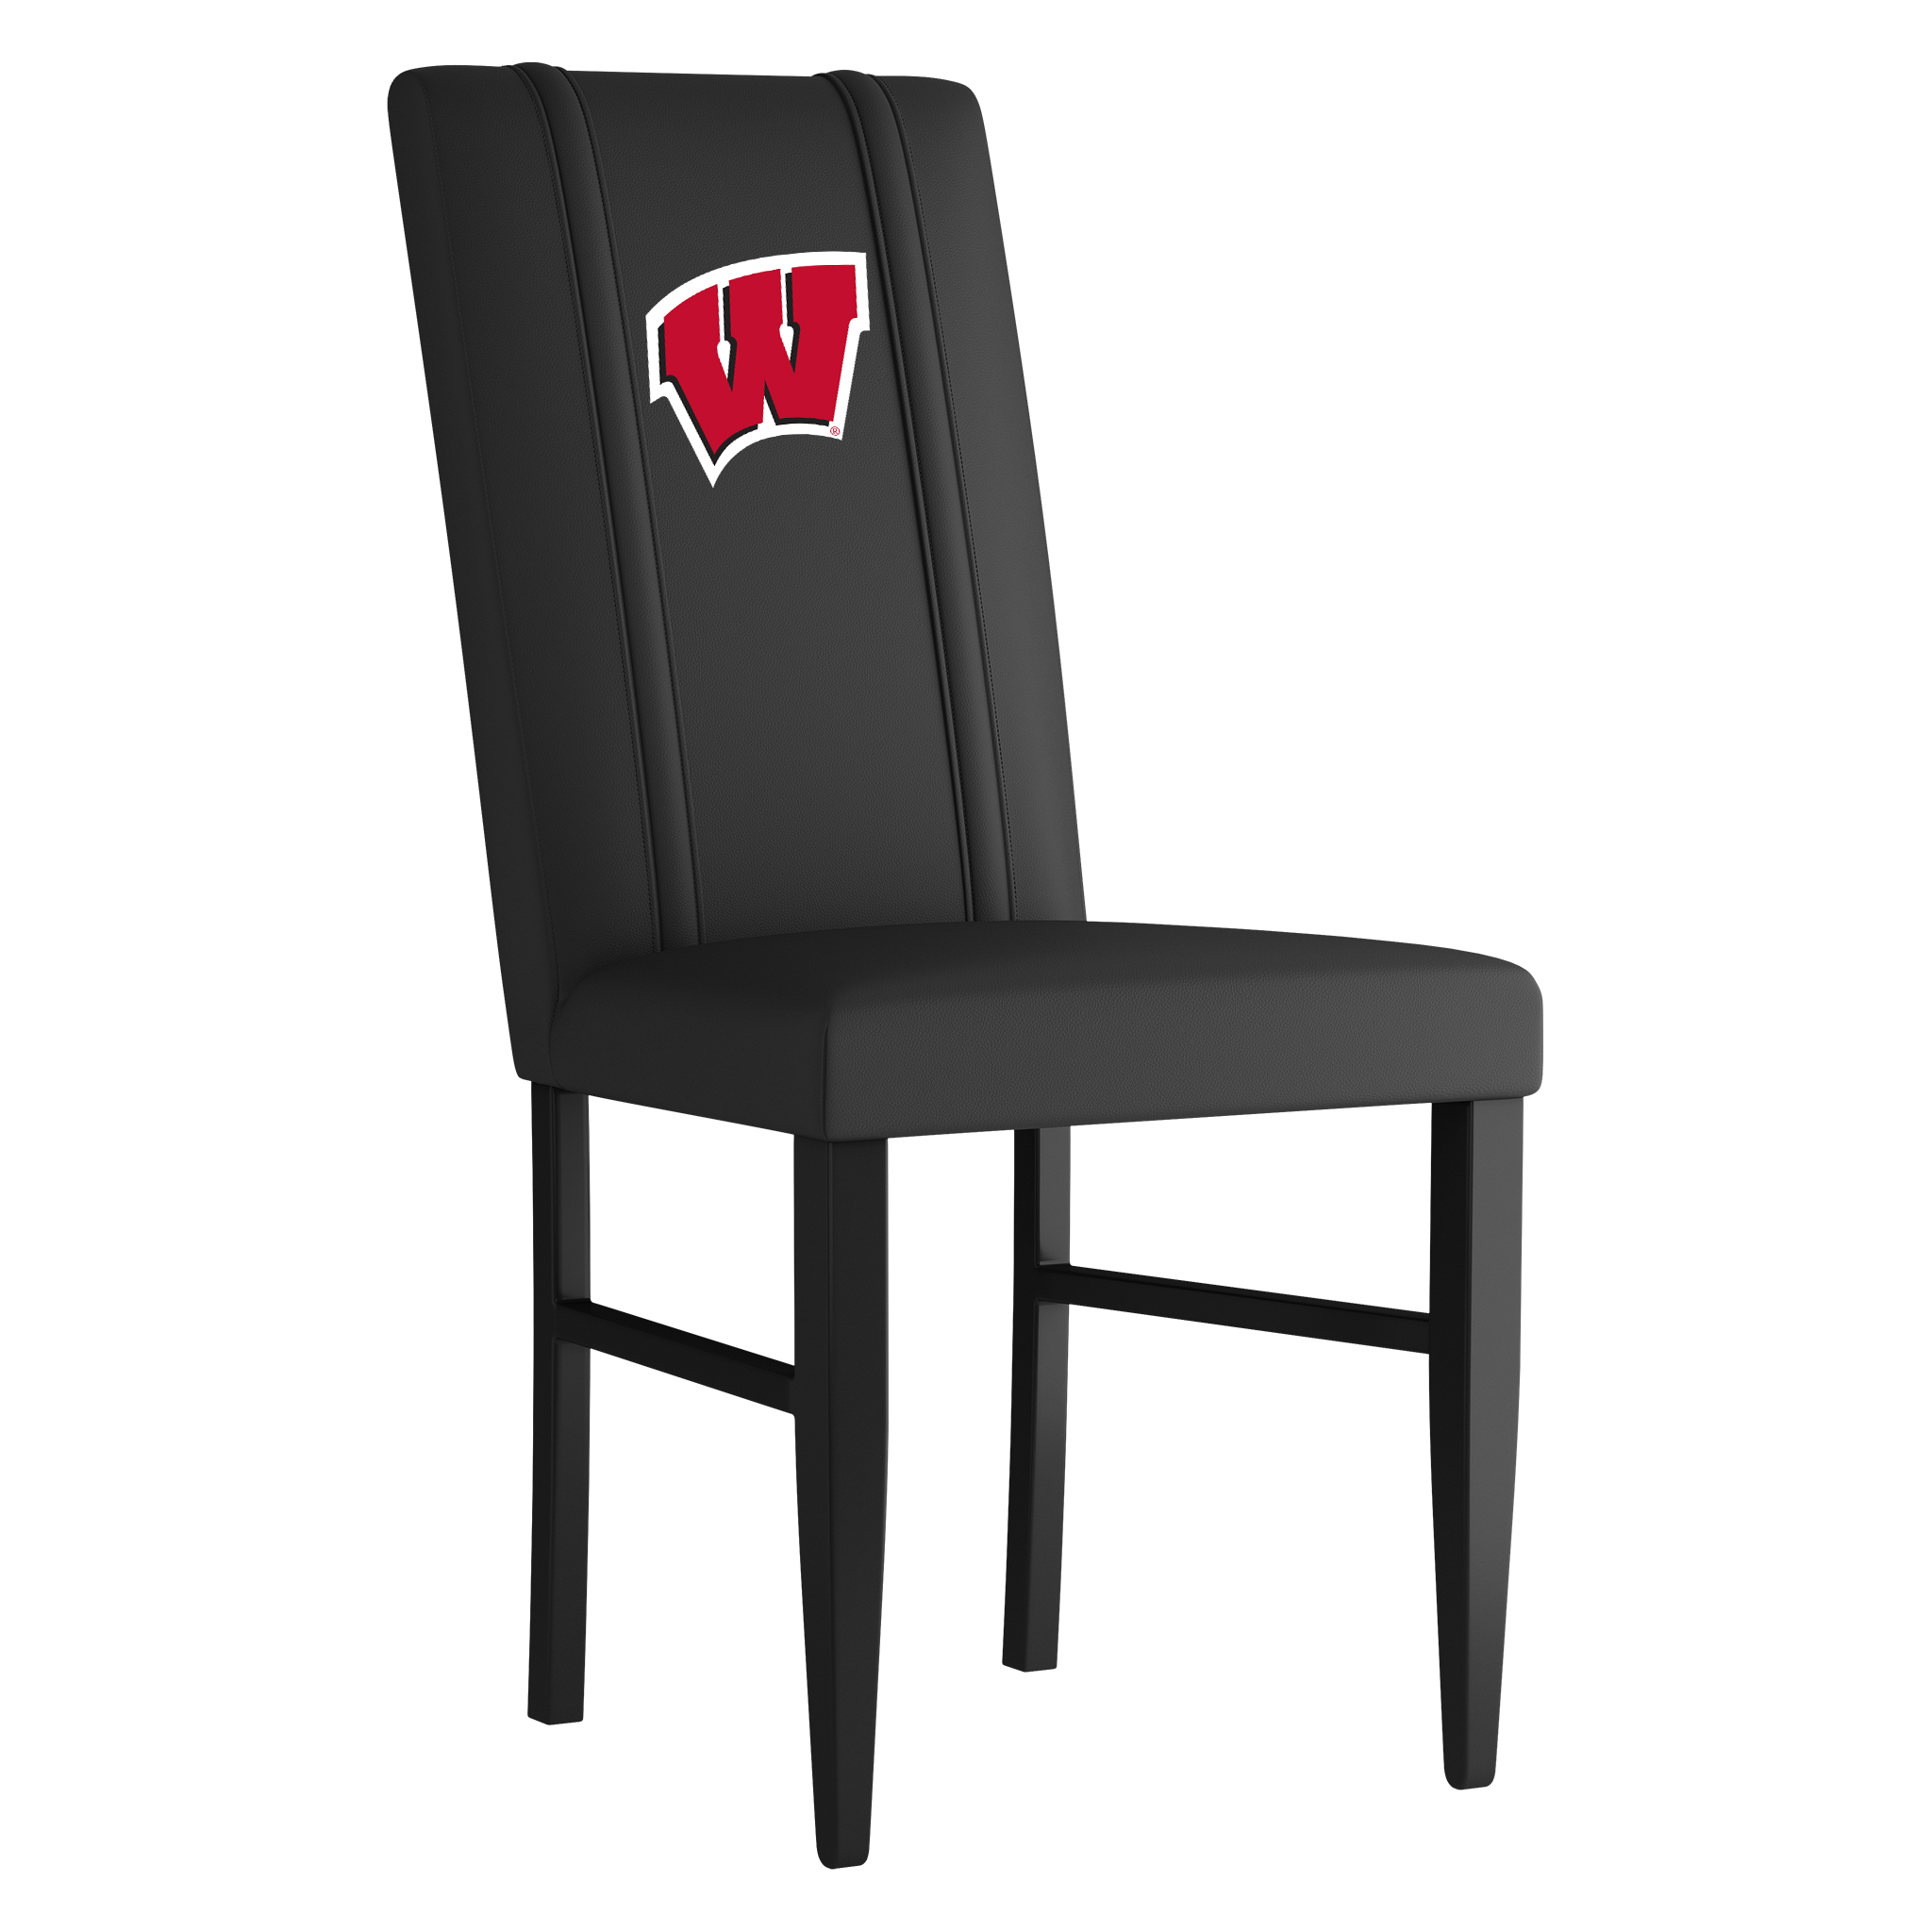 Wisconsin Badgers Side Chair 2000 With Wisconsin Badgers Logo